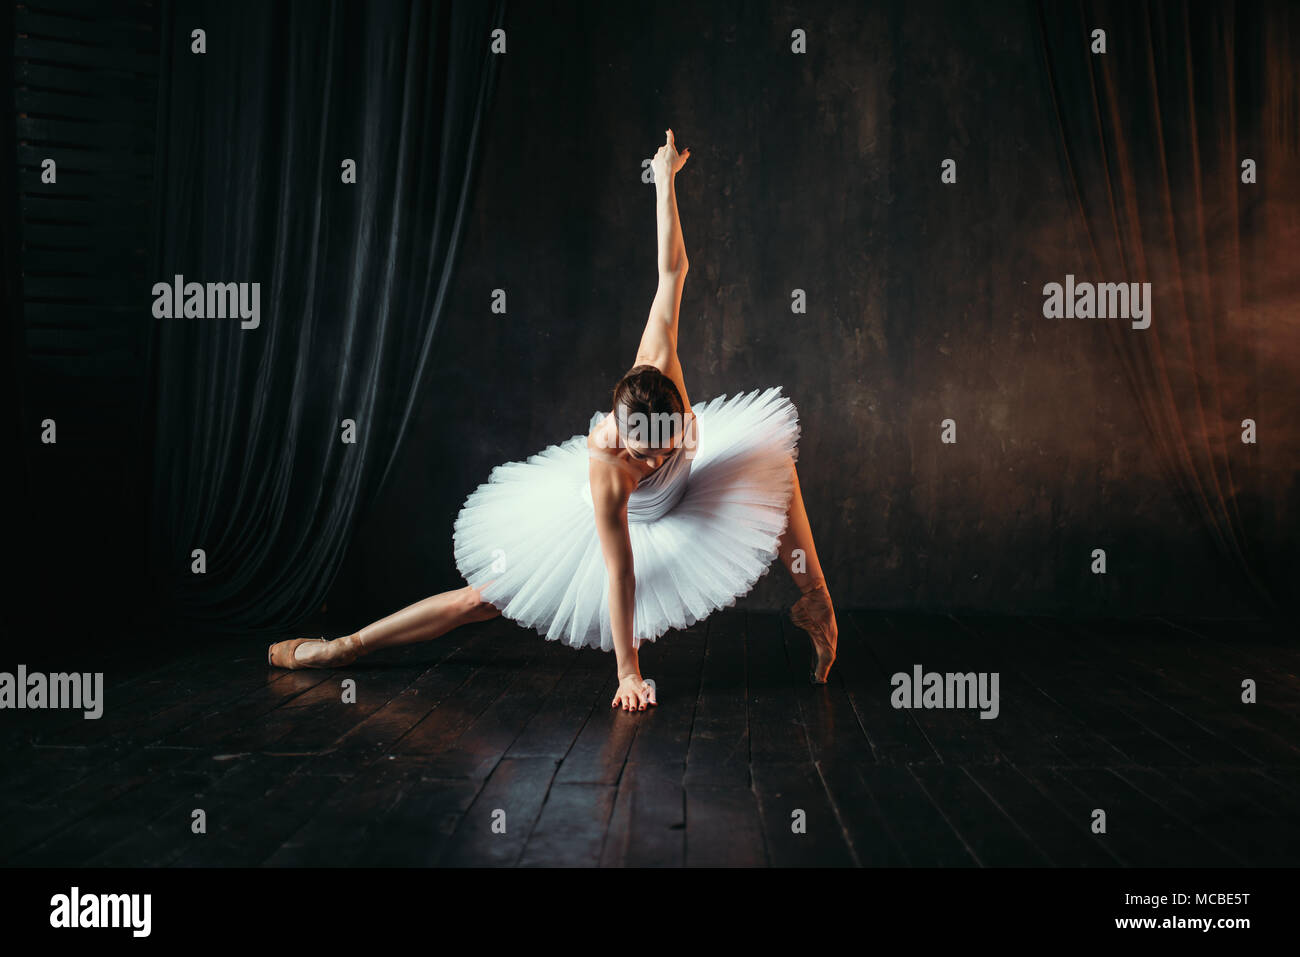 Grace of ballerina in motion on theatrical stage Stock Photo